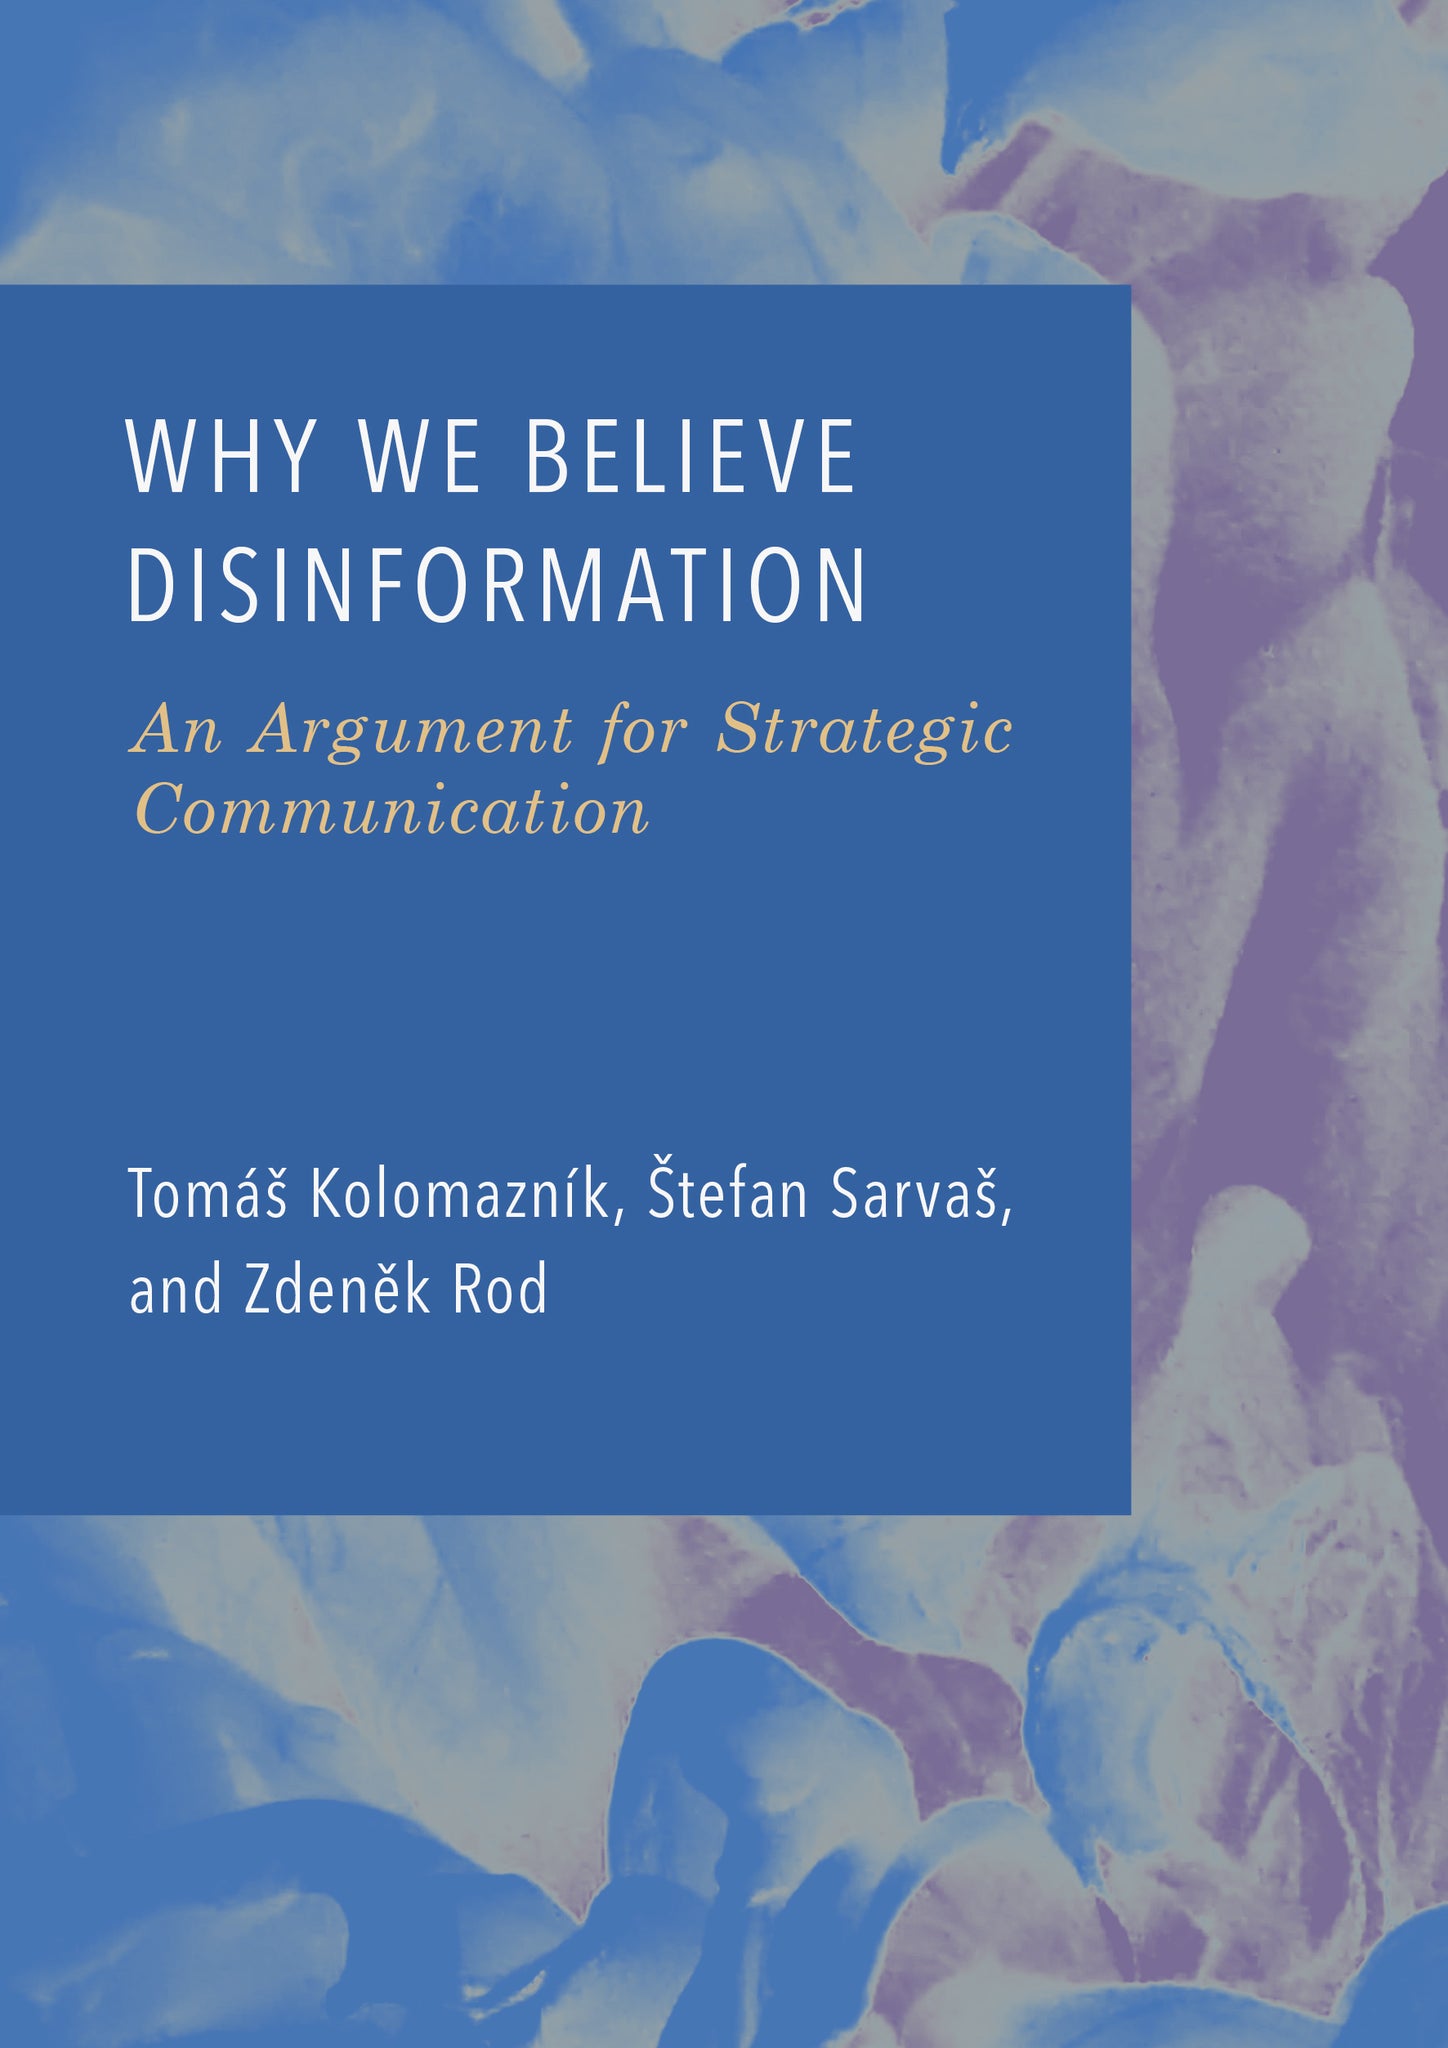 Why We Believe Disinformation: An Argument for Strategic Communication